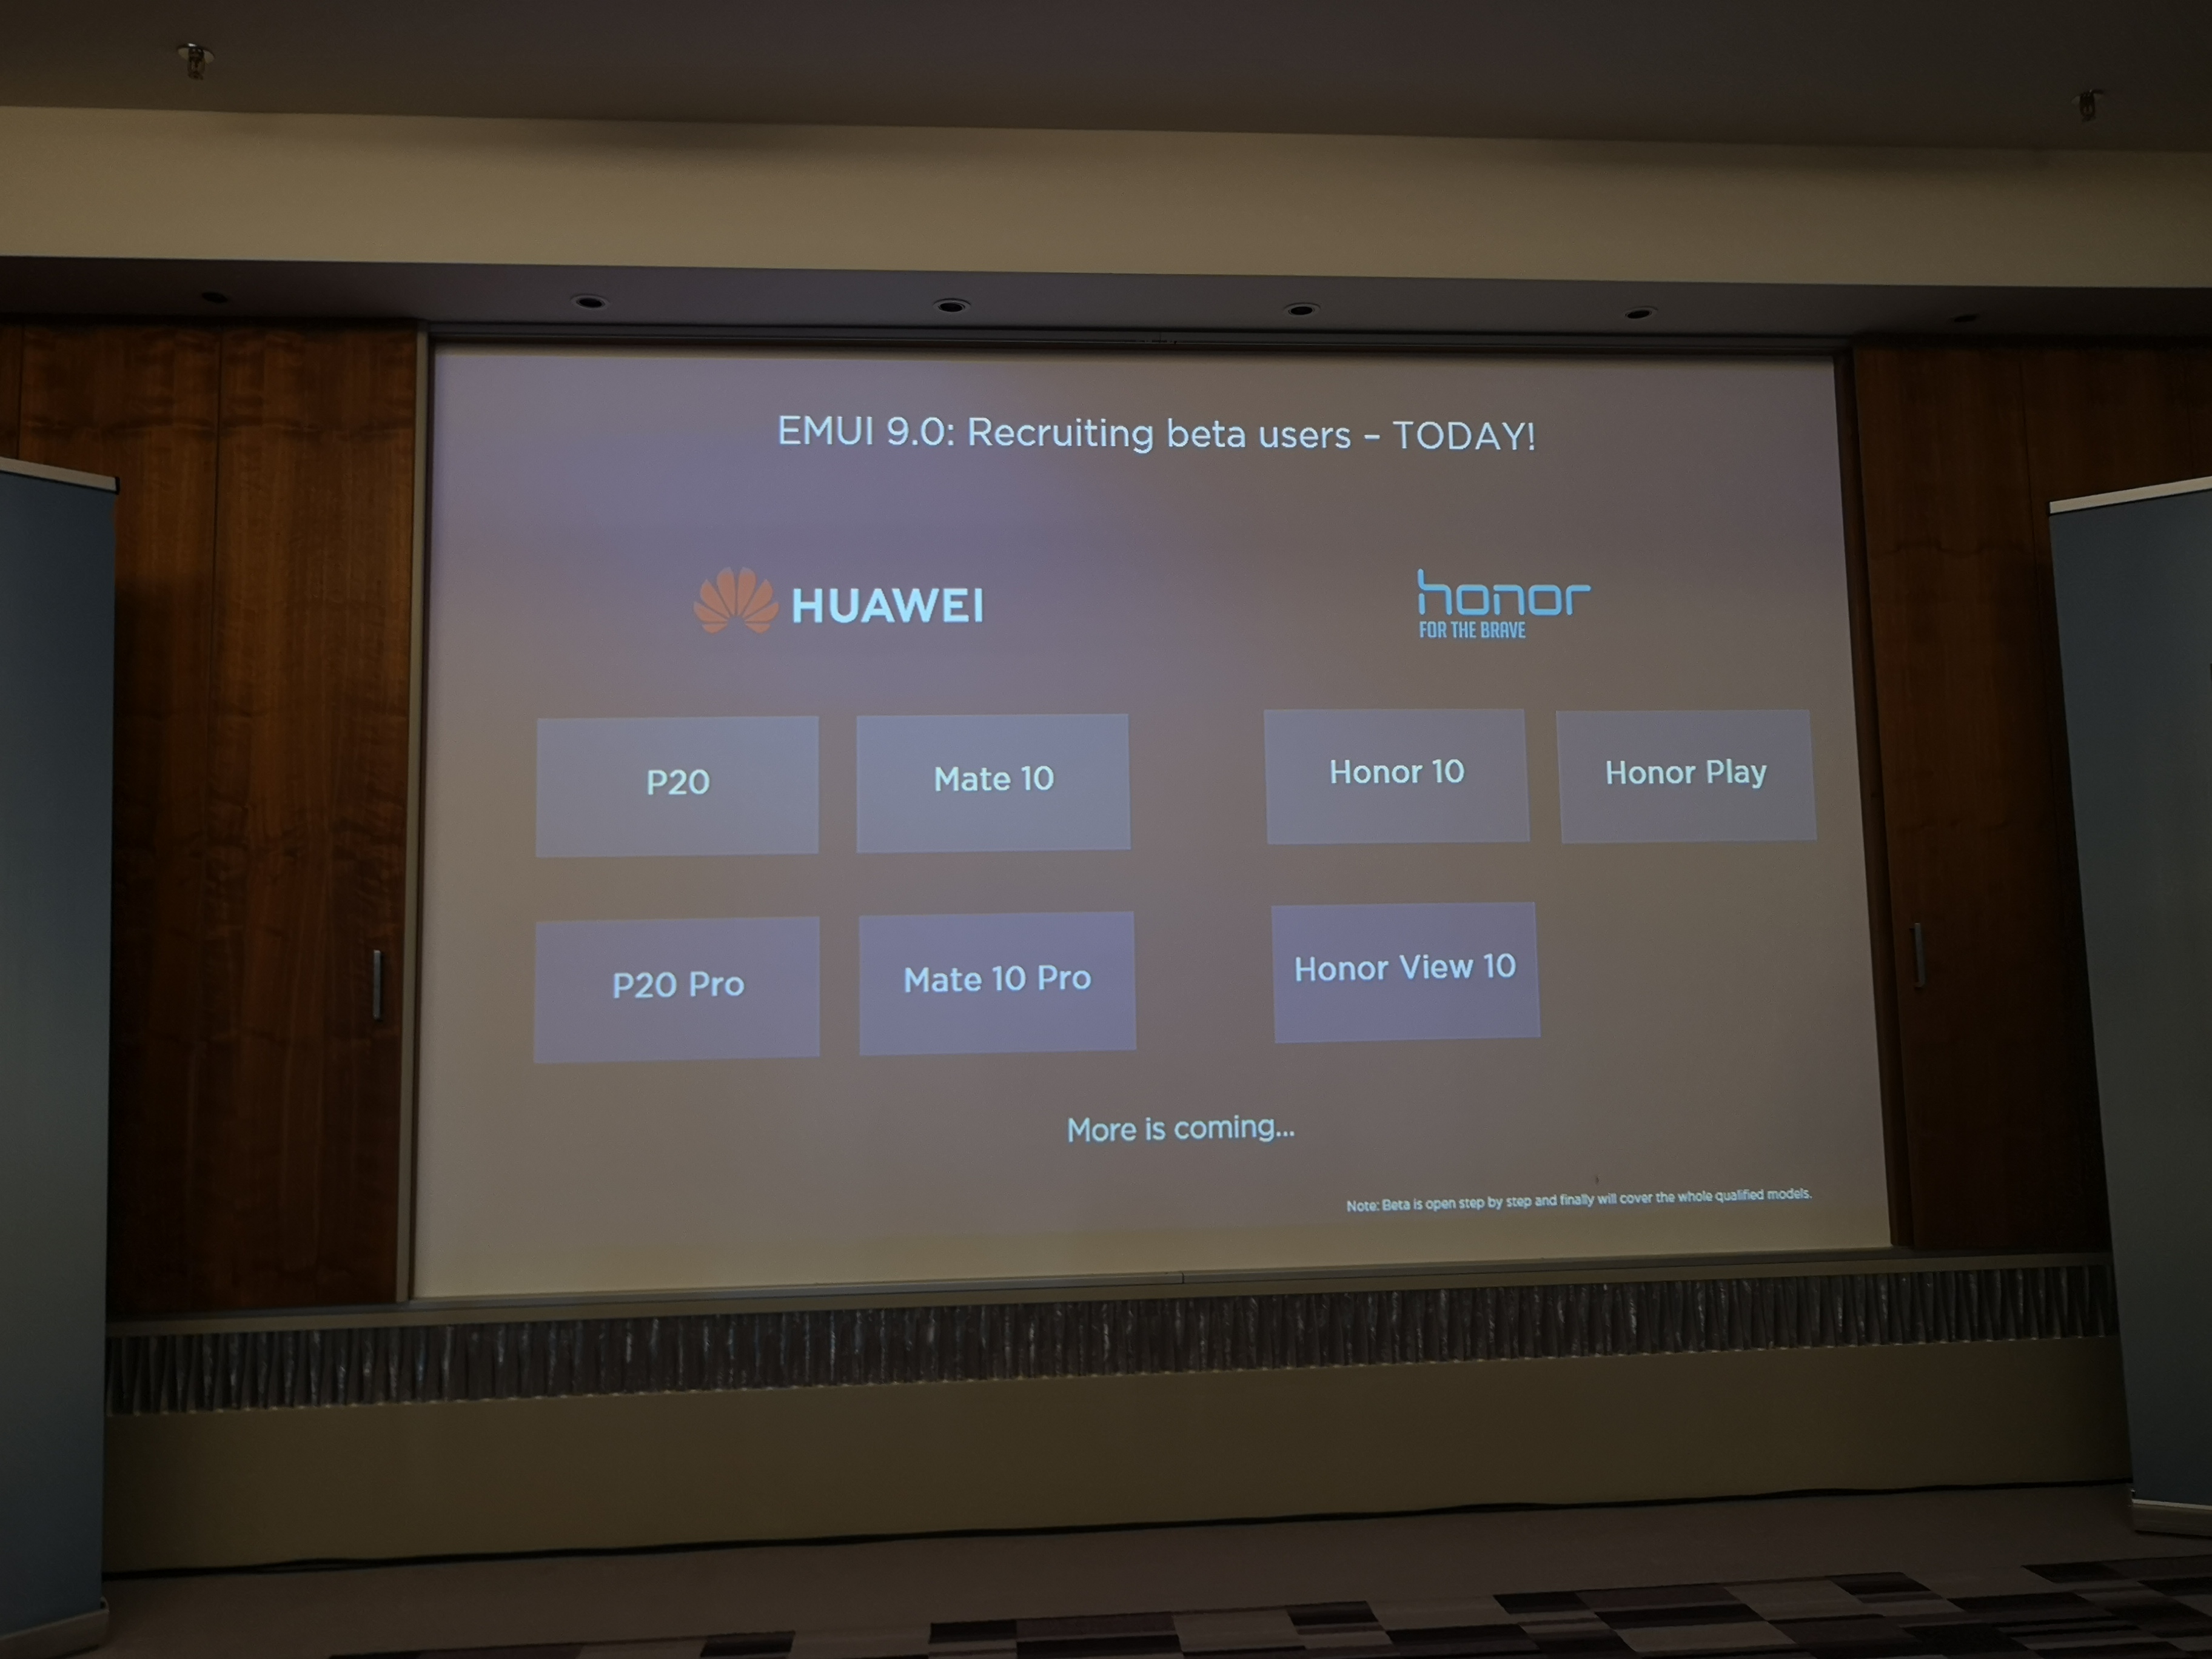 Huawei devices to receive EMUI 9 from a presentation slide. 